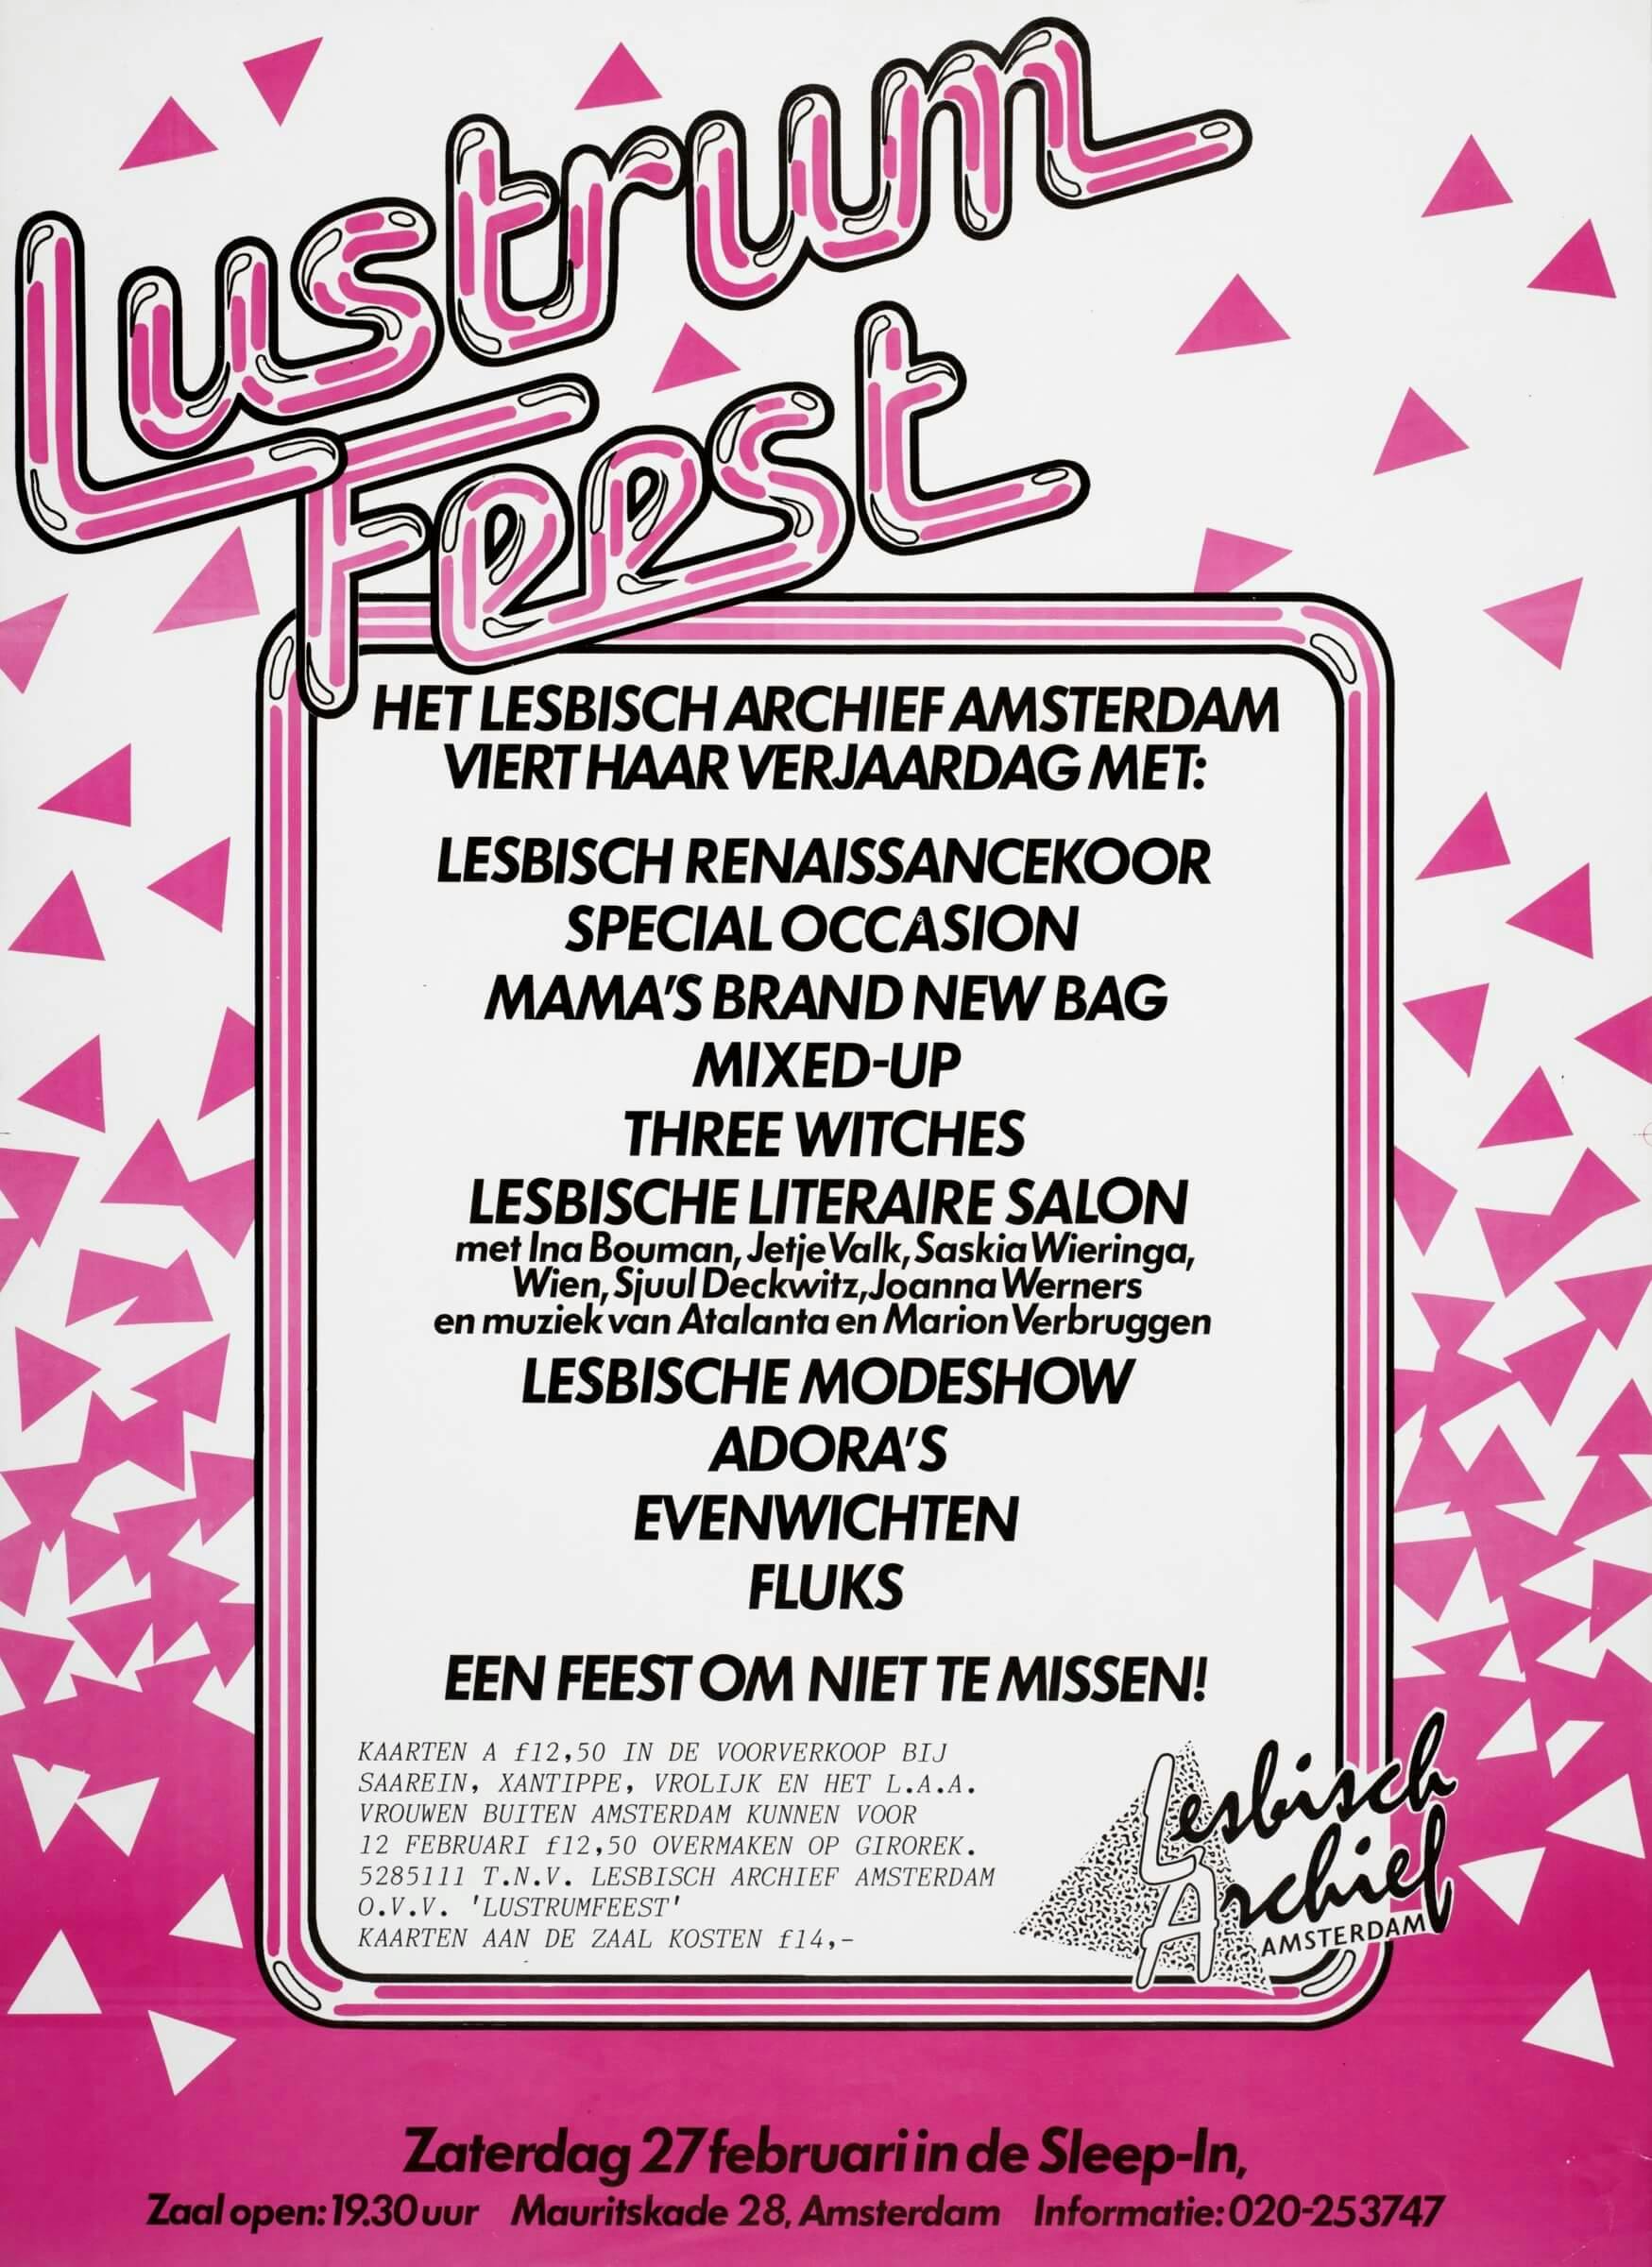 Poster [Lustrum Party. The Lesbian Archive Amsterdam Celebrates Her Anniversary] by Lesbisch Archief Amsterdam, 1988, design: unknown. Source: Collection IAV-Atria  